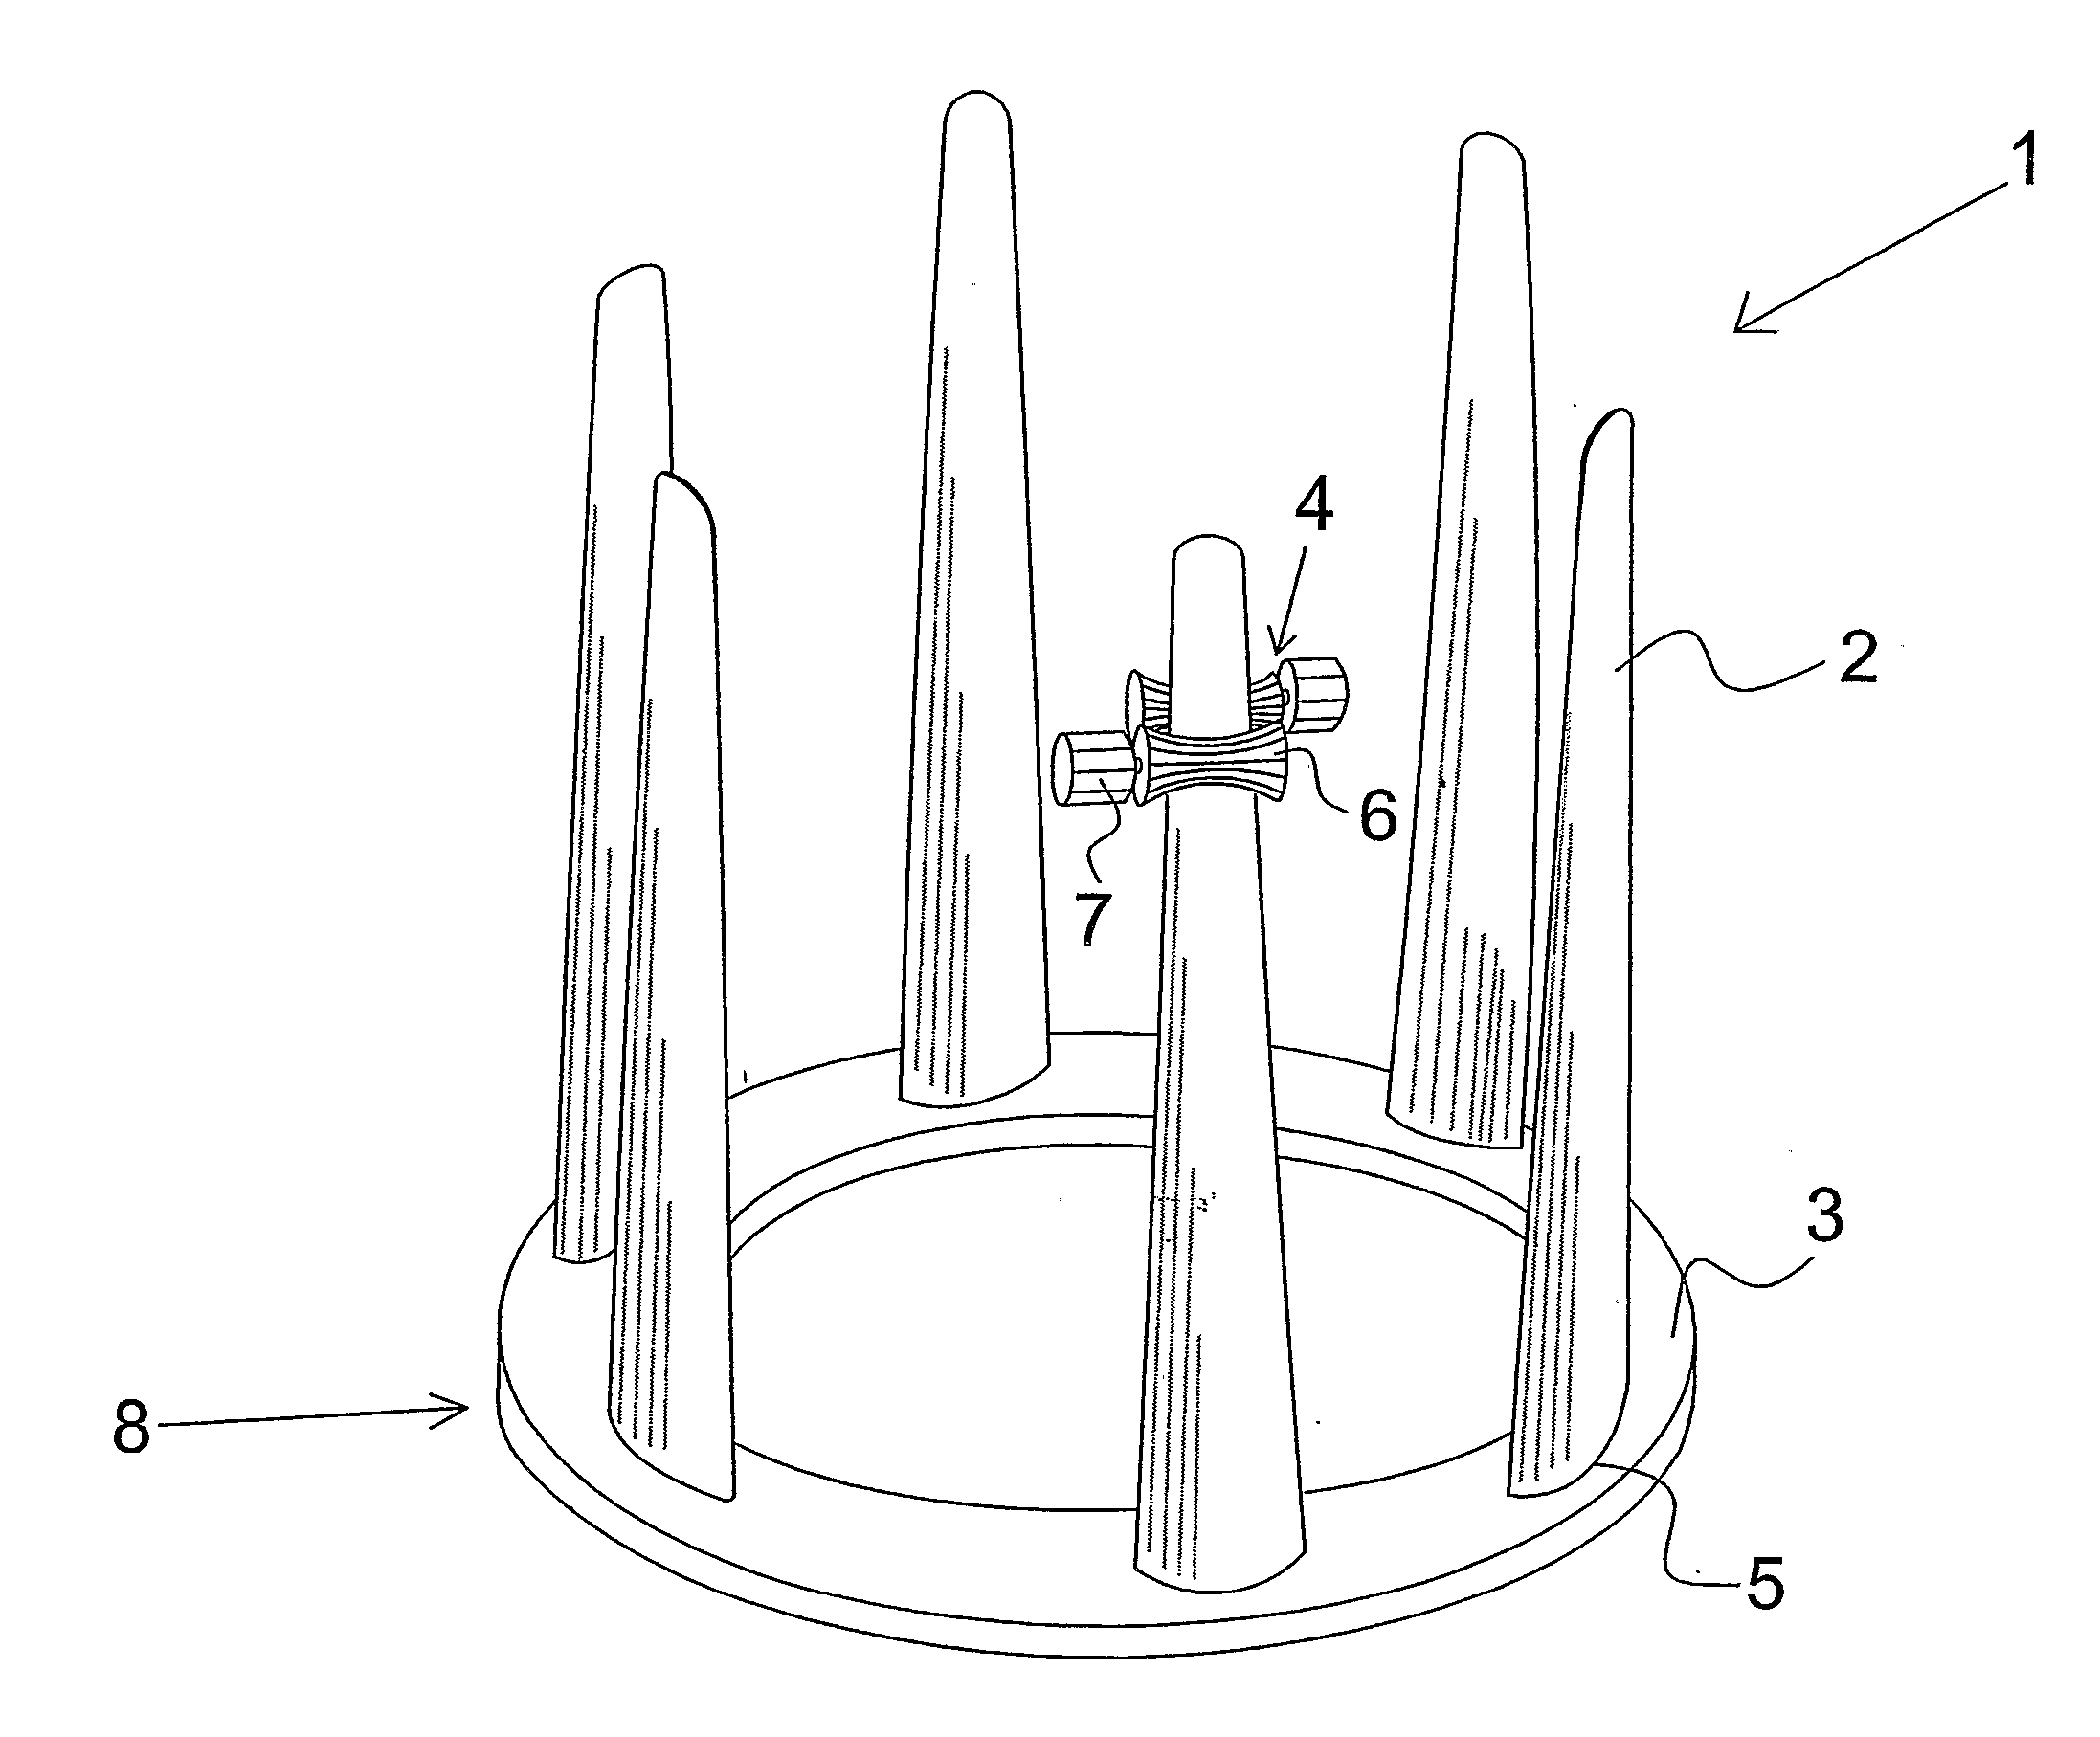 Apparatus and Method for Processing Fur